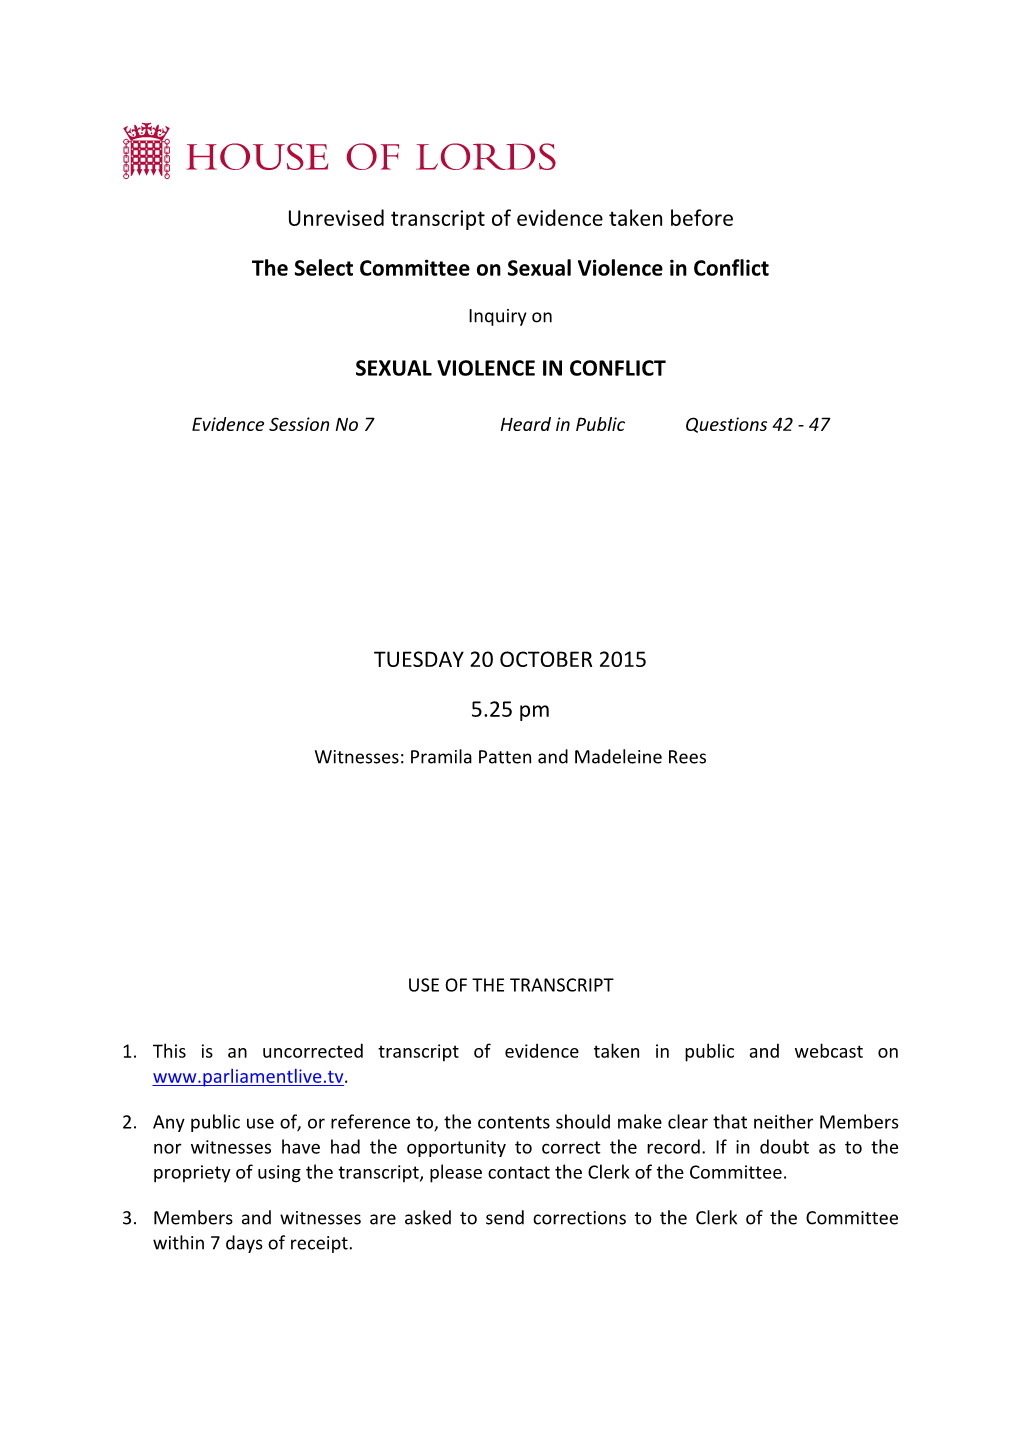 Lords Select Committee on Sexual Violence in Conflict